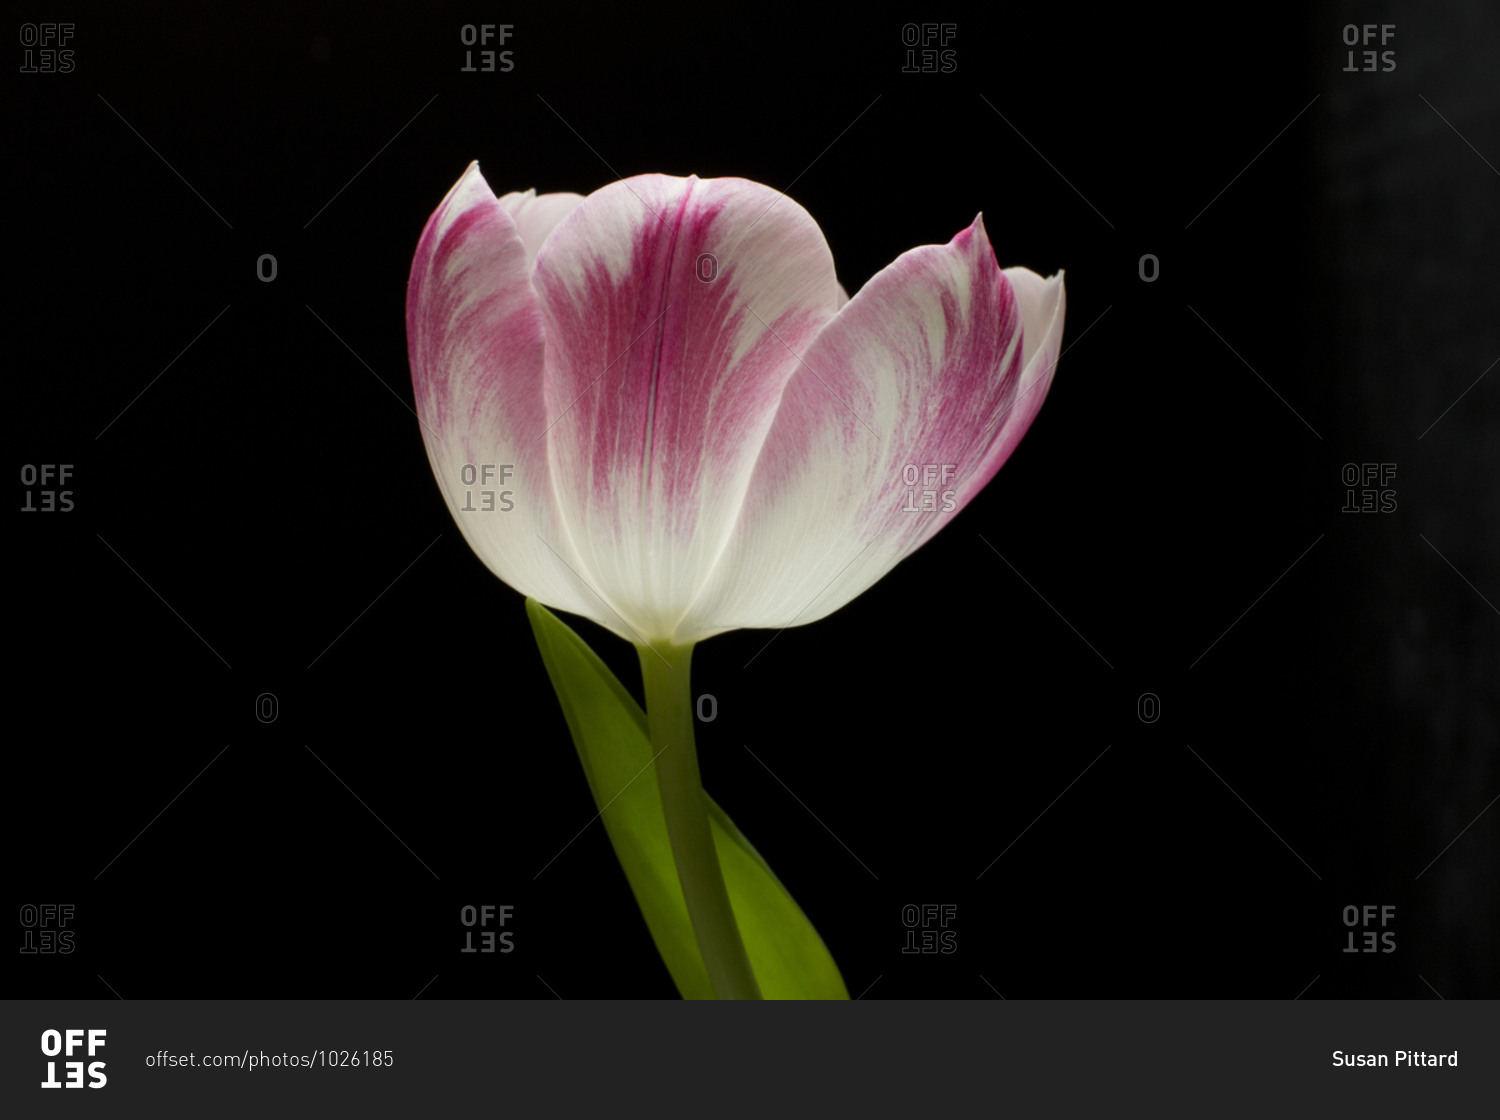 A single pink and white tulip in front of black background